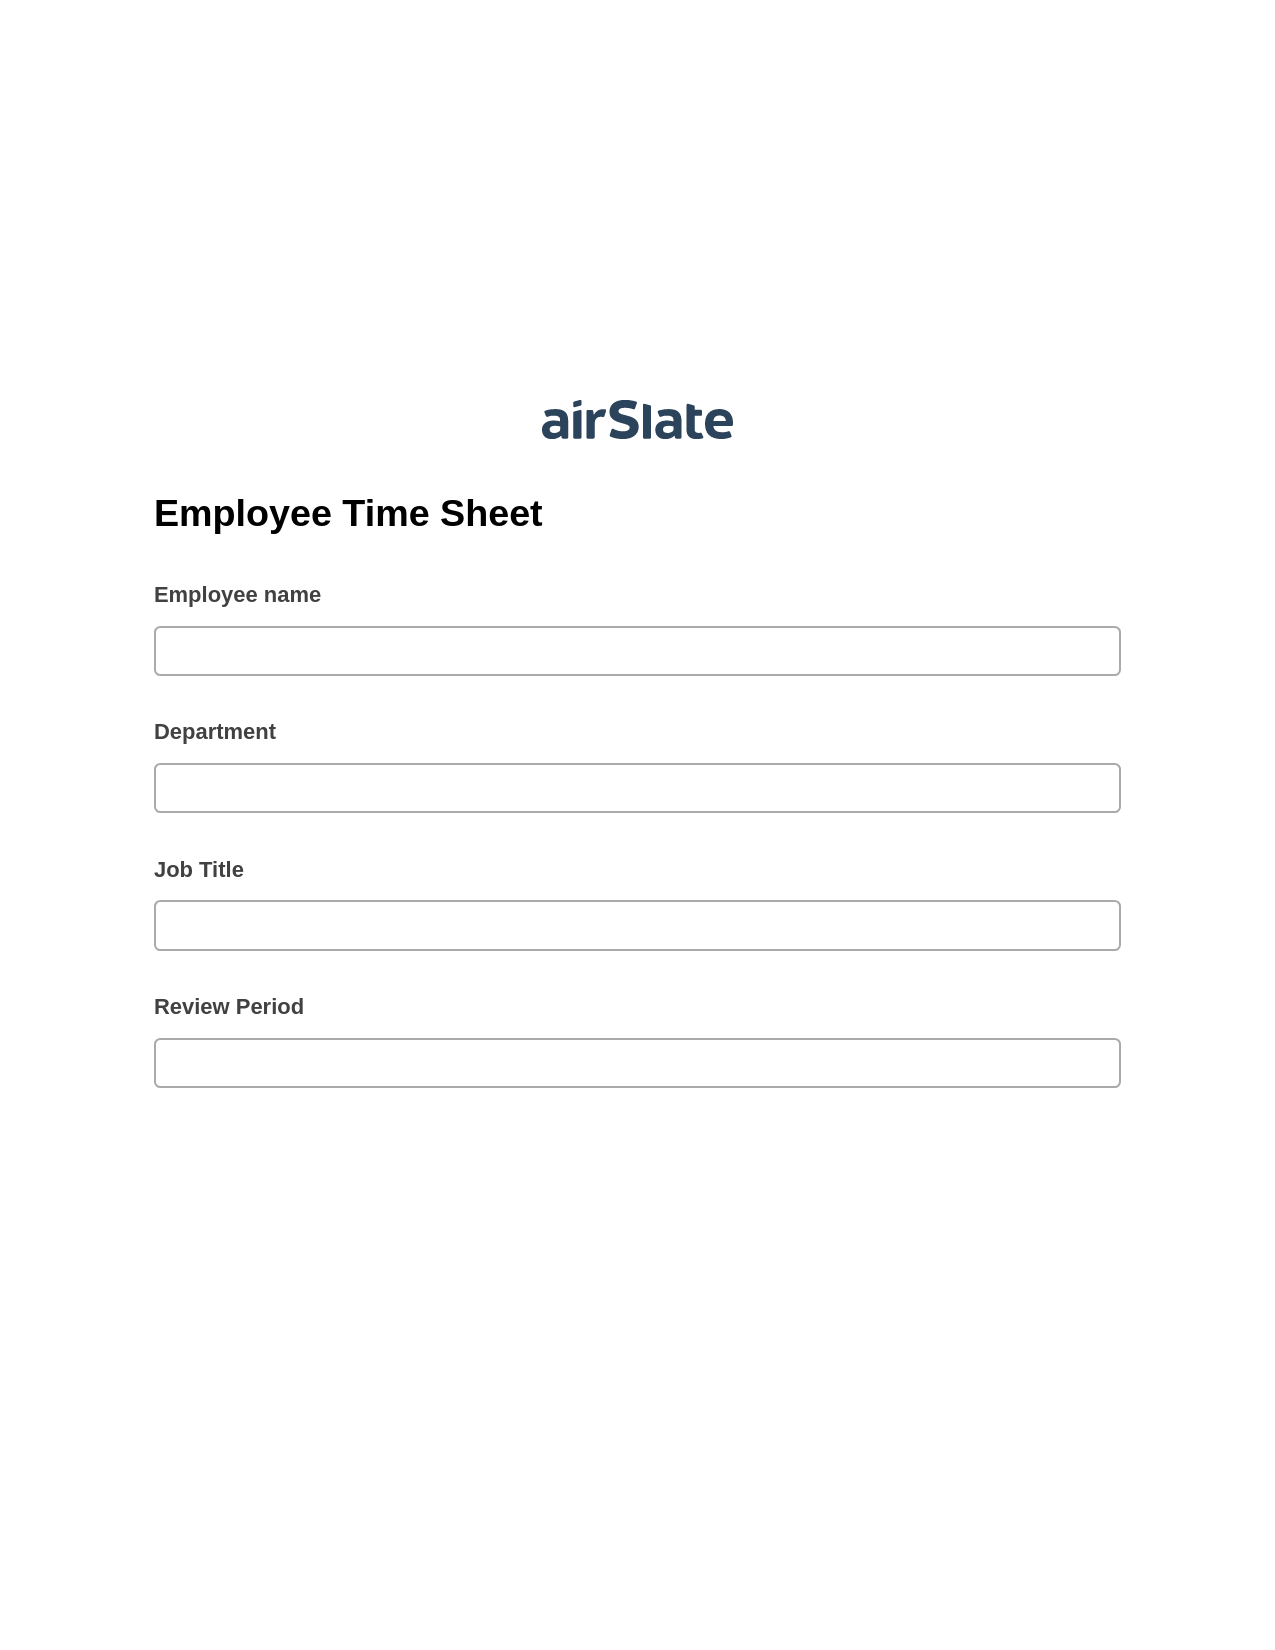 Multirole Employee Time Sheet Pre-fill from Smartsheet Bot, Hide Signatures Bot, Export to Excel 365 Bot